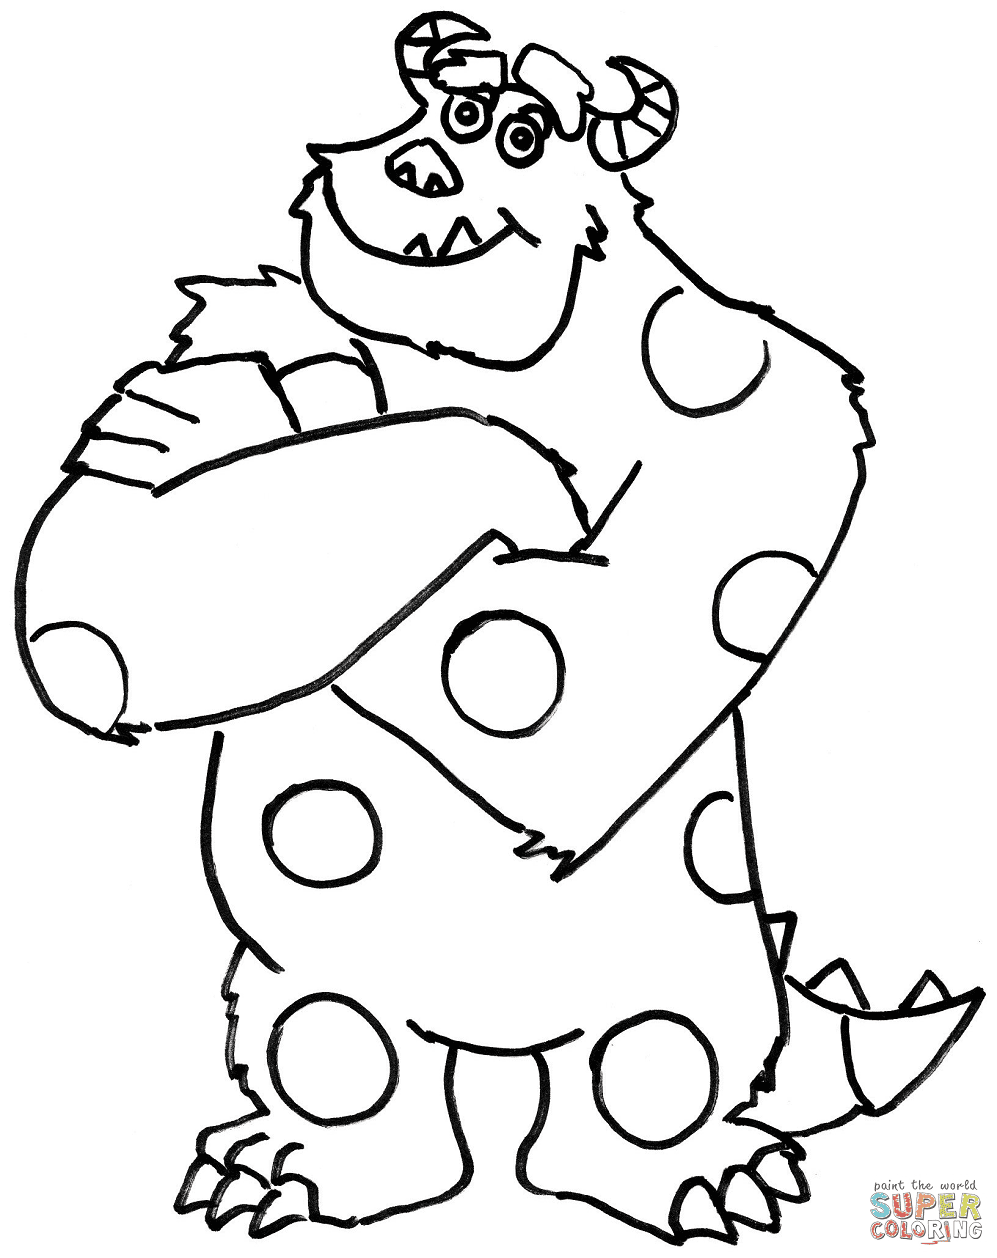 James Sulley Sullivan Coloring Pages